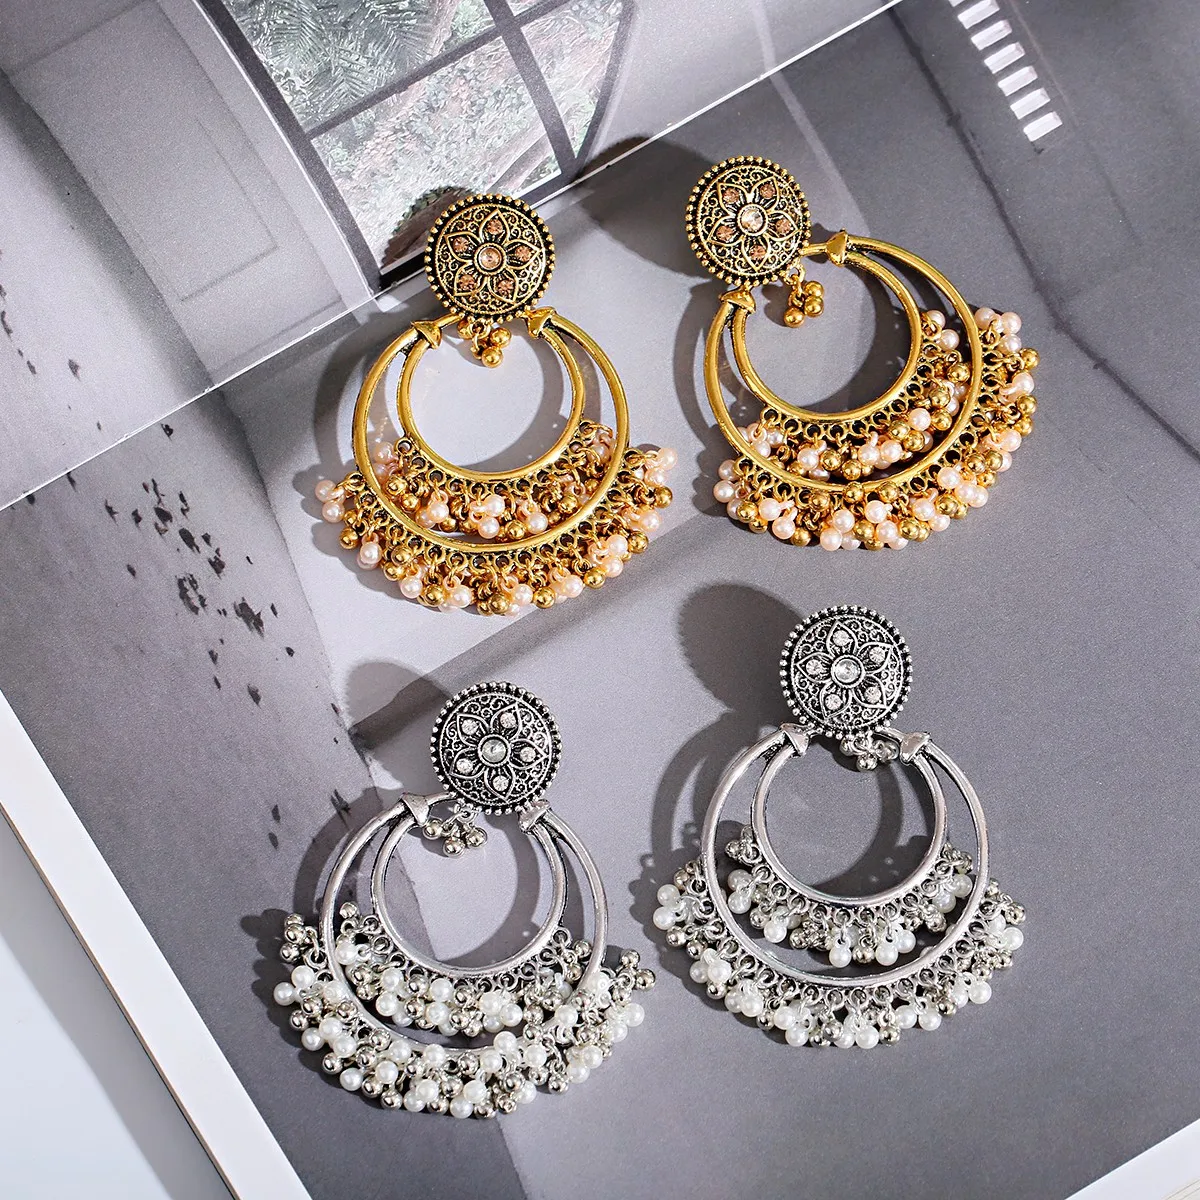 

2021 Latest Fashion Jewelry Copper Vintage Big Hoop Earrings WithLarge Fringed Pearls Lady's Street Style Statement Earring